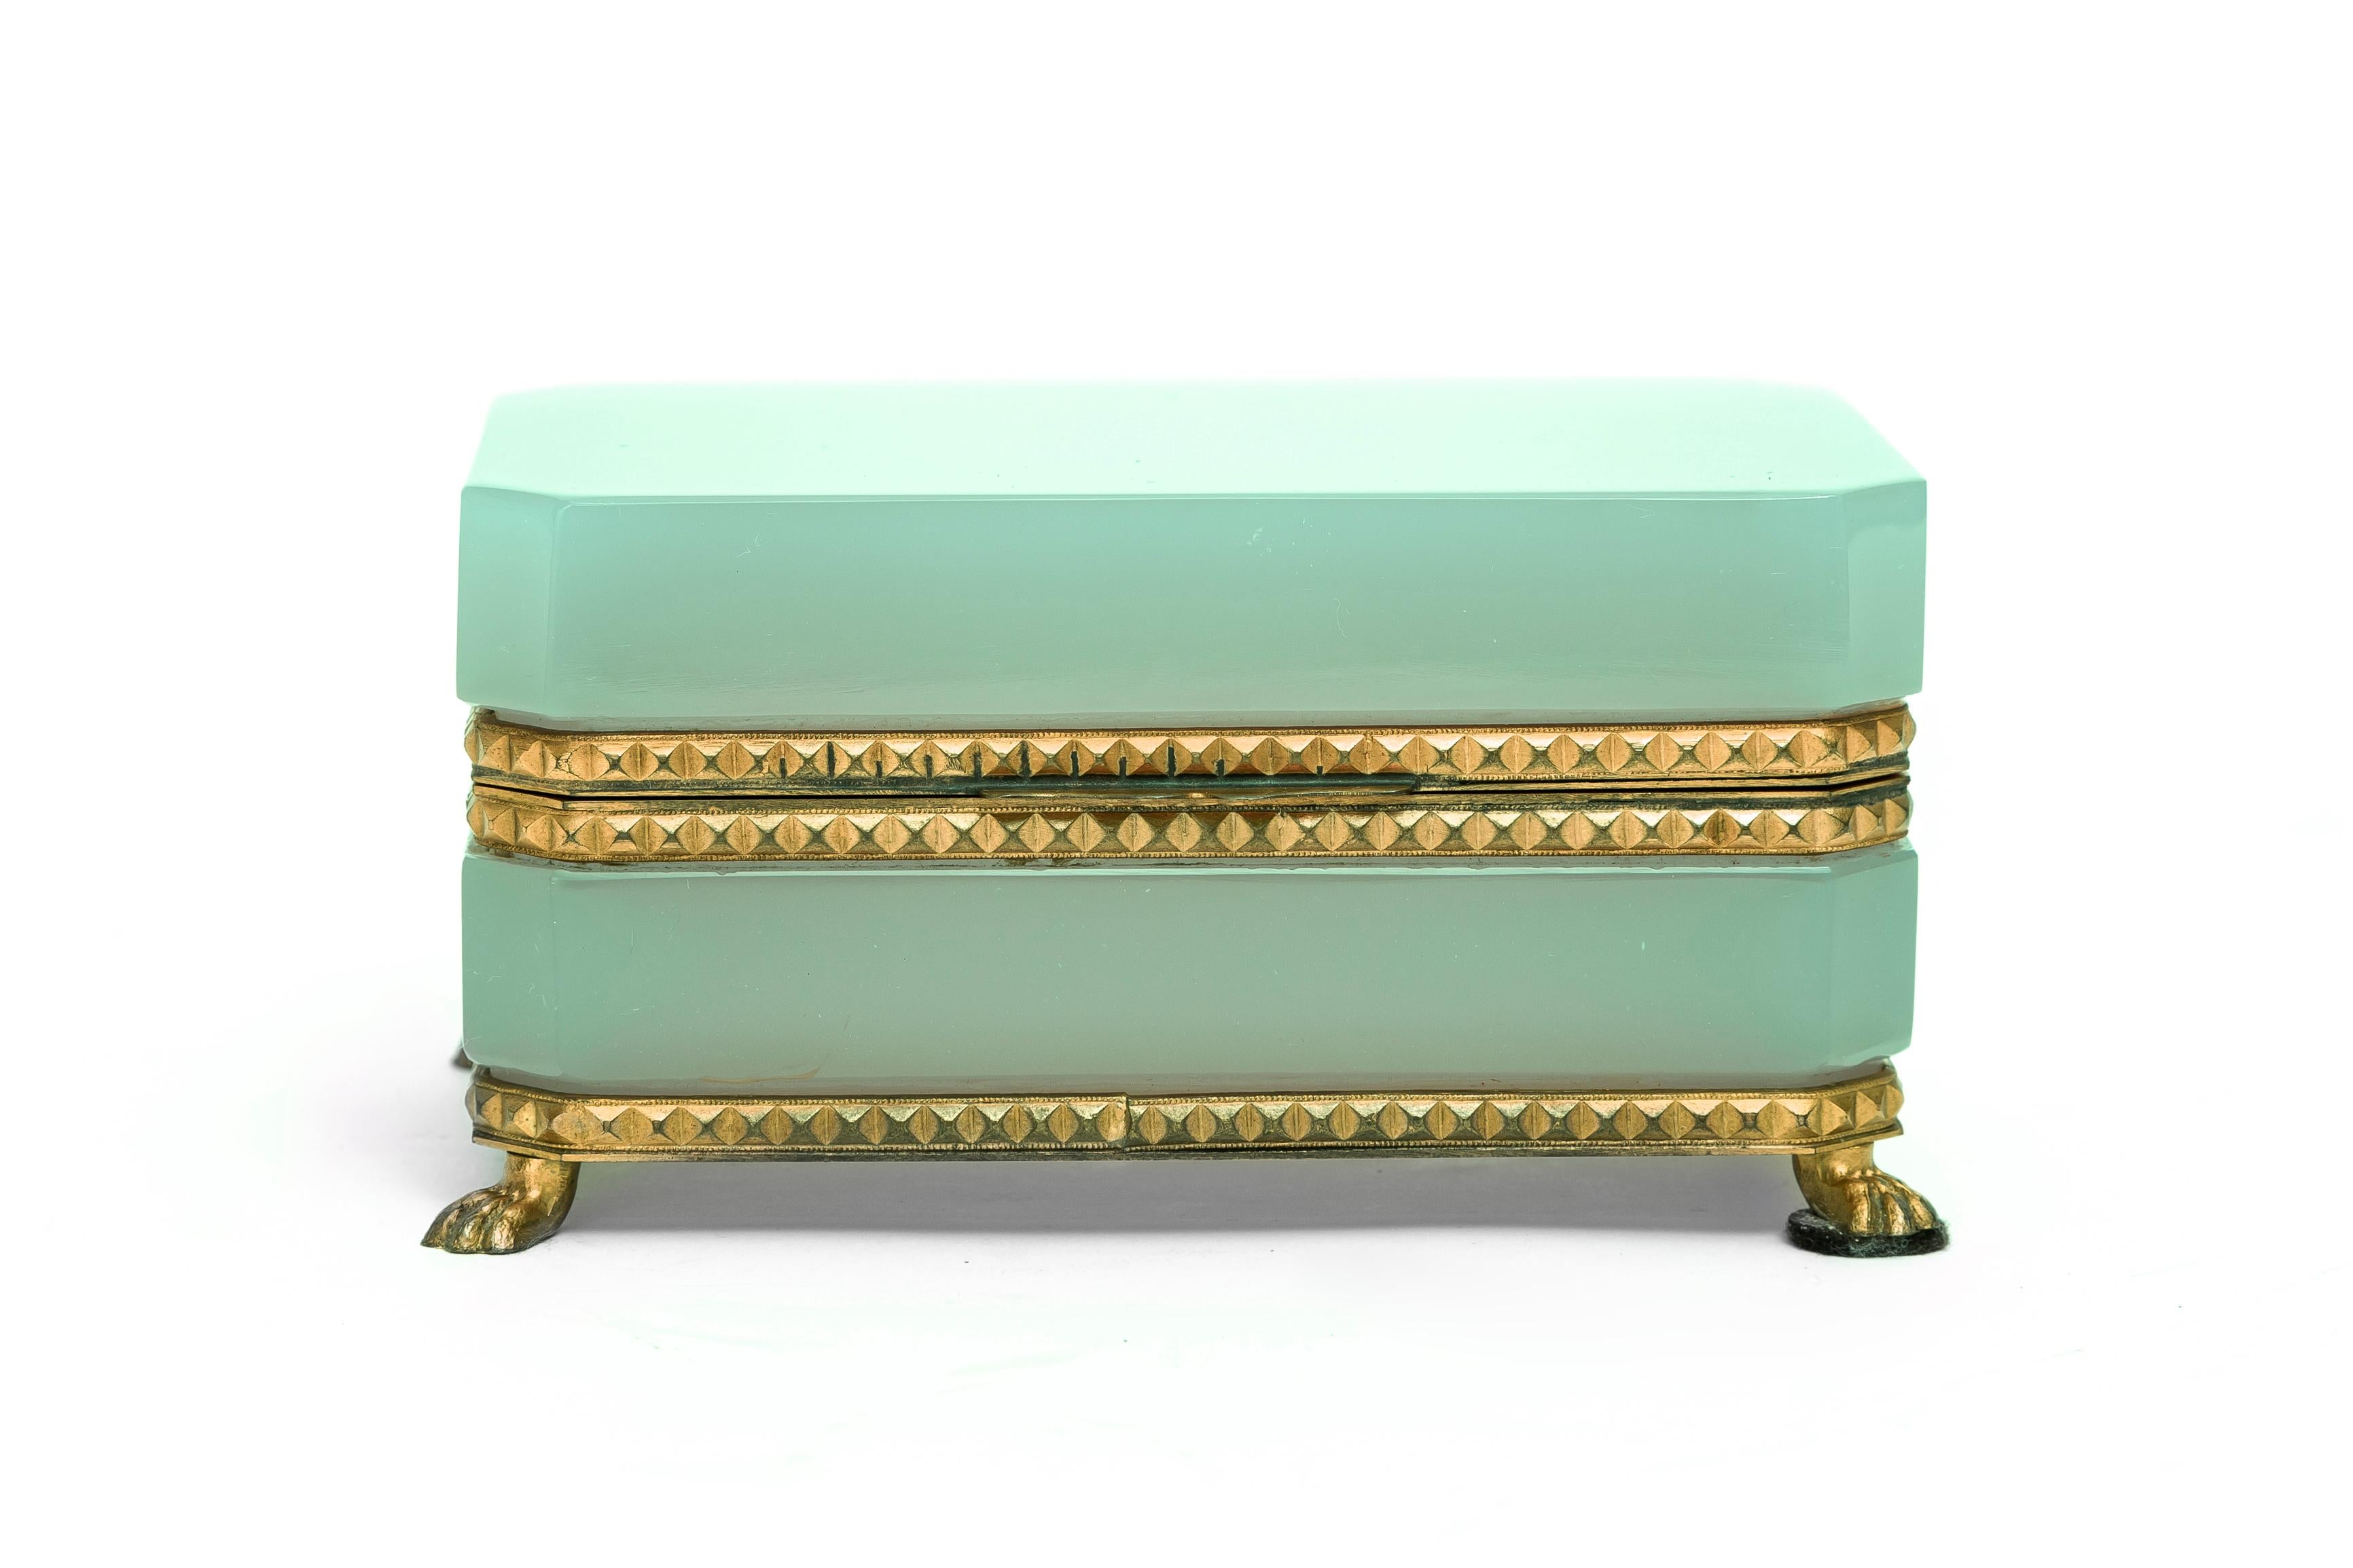 A French  Dichroic Opaline Crystal Dore Bronze Mounted Green & Pink Colored Box.  This absolutely gorgeous jewelry box showcases opaque pale pink and pale green Dichroic Crystal. The dore bronze mounts elevate the aesthetic with a diamond-stylized